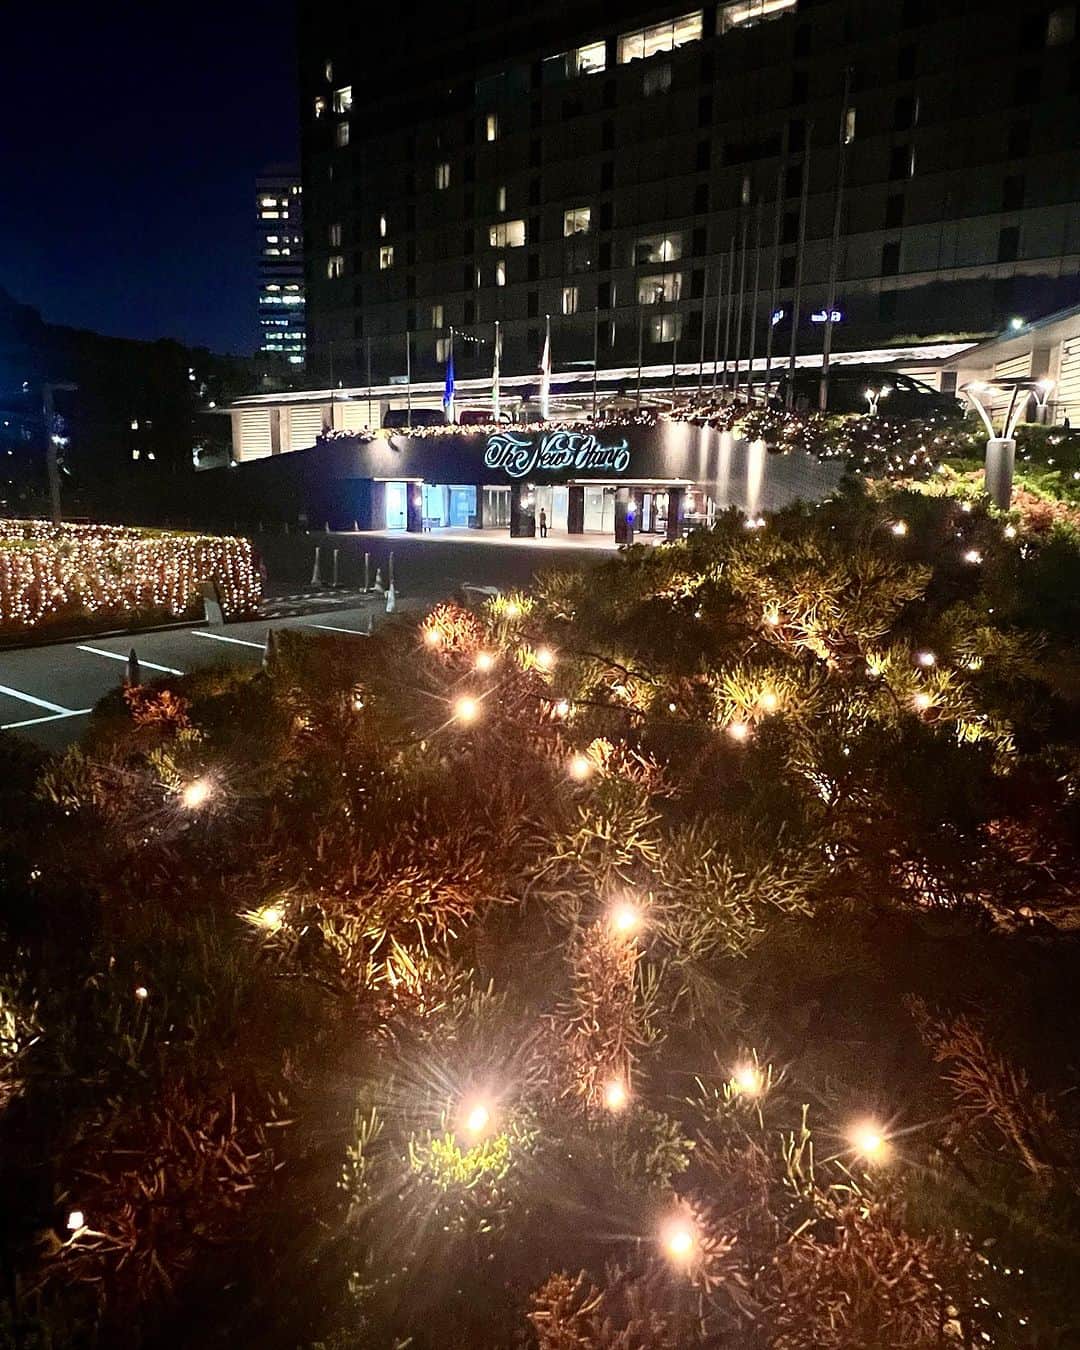 ホテル ニューオータニのインスタグラム：「【Our Winter Illumination ✨ starts today.／本日よりスタート💫ウィンターイルミネーション✨】  The illumination which follows the hotel's perimeter has started today.  The total length of the illumination is nearly 10 km, and contains 130,000 lights that will envelop the hotel, making it one of the largest winter illuminations of any hotel in Tokyo.  As well, to get into the holiday spirit for the upcoming Christmas season, 30 Christmas trees of various sizes are scheduled to appear sequentially throughout the hotel’s grounds.  Come to the New Otani  and feel the true holiday spirit.  For more information, tap the "Christmas" link from the URL in the @hotelnewotanitokyo's profile👆.  本日よりホテル外周のイルミネーションがスタートしました。  総延長約10㎞、13万球のイルミネーションが包み込む、都内ホテル最大級のウィンターイルミネーションです。  これからのクリスマスシーズンに向けて、敷地内に大小30のクリスマスツリーも順次登場予定です。  ひと足先にホリデー気分を感じにいらしてください。  ◇詳細は @hotelnewotanitokyo プロフィールのURLより、「CHRISTMAS」リンクをタップ👆  🌟Winter Illumination Period  Hotel perimeter illumination: October 27, 2023 (Fri.) - February 29, 2024 (Thu.) <planned> Main tree: November 10, 2023 (Fri.) - December 25, 2023 (Mon.) <planned>. Time 16:00 - 26:00 *Vary according to location This holiday cheer is presented gratis!   🌟ウィンターイルミネーション 期間 ホテル外周イルミネーション：2023年10月27日（金）～ 2024年2月29日（木）＜予定＞ メインツリー：2023年11月10日（金）～12月25日（月）＜予定＞  時間 16:00～26:00 * 場所により異なります 料金 鑑賞無料 場所 ホテル敷地内  #イルミネーション #クリスマスツリー #クリスマス #クリスマスイブ #クリスマスケーキ #クリスマスディナー #クリスマスパーティ #christmas #xmas #ホテル #東京ホテル #ホテルステイ  #ホテルニューオータニ #ニューオータニ #hotelnewotani #newotani  #tokyo #japan #tokyotrip  #tokyotravel #tokyohotel #hotelstay #virtualtour #forbestravelguide #futuretravelguide #thepreferredlife」